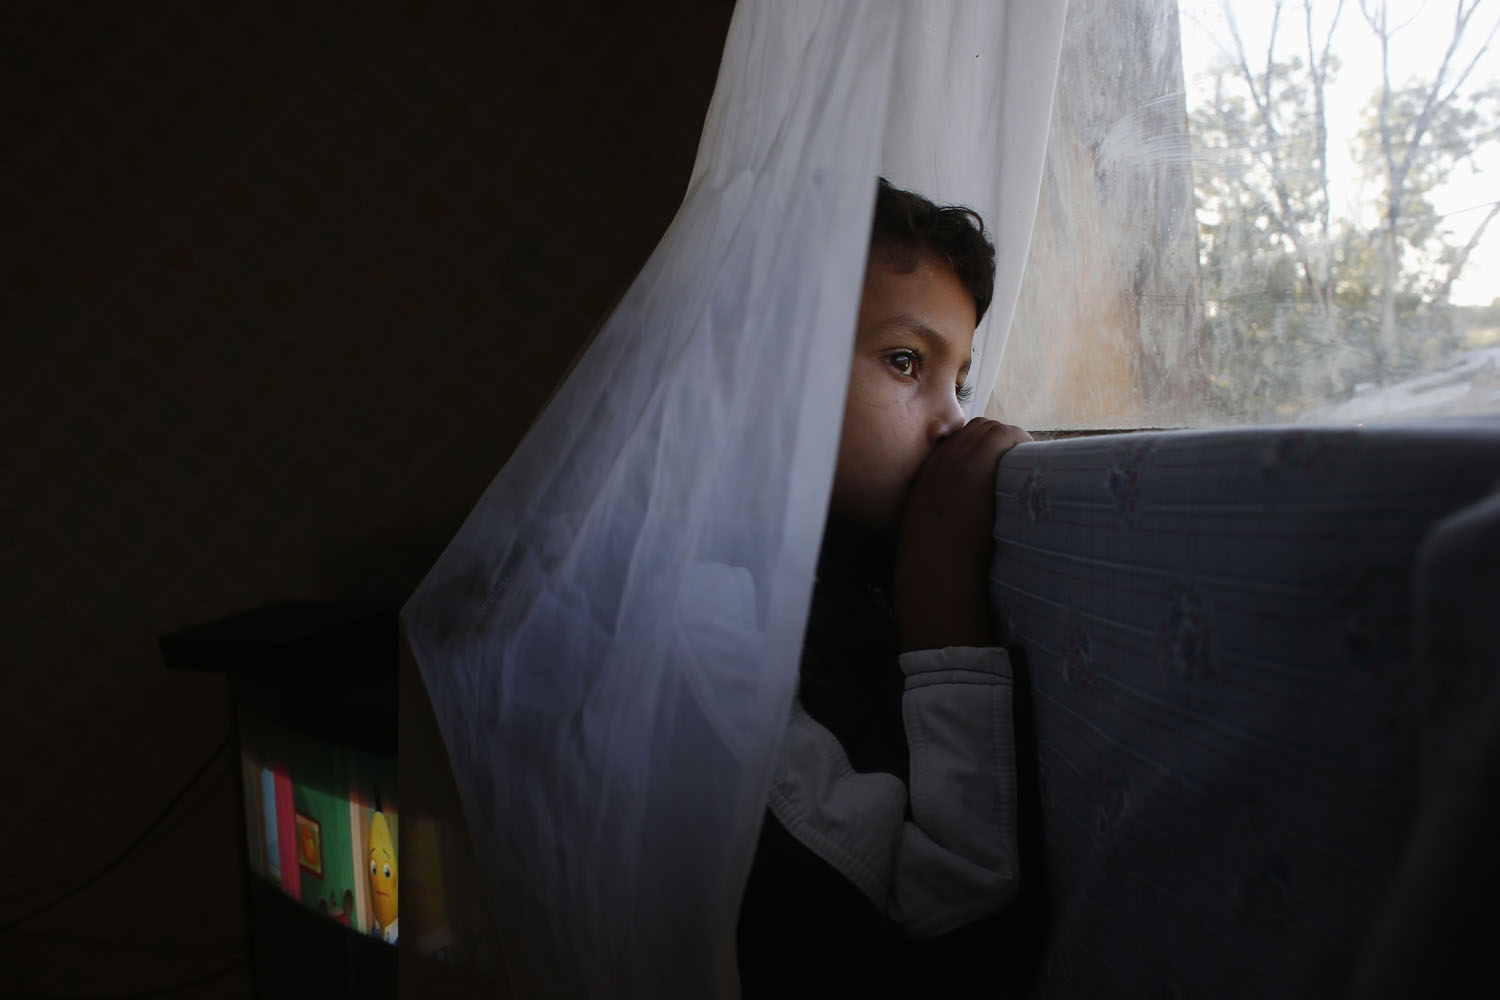 Oct. 9, 2012. 6-year-old Abel watches from his window as an excavator demolishes a neighbor's shack in the shantytown settlement of  El Gallinero  on the outskirts of Madrid. A handful of shacks were torn down under the orders of Madrid's town planning board.